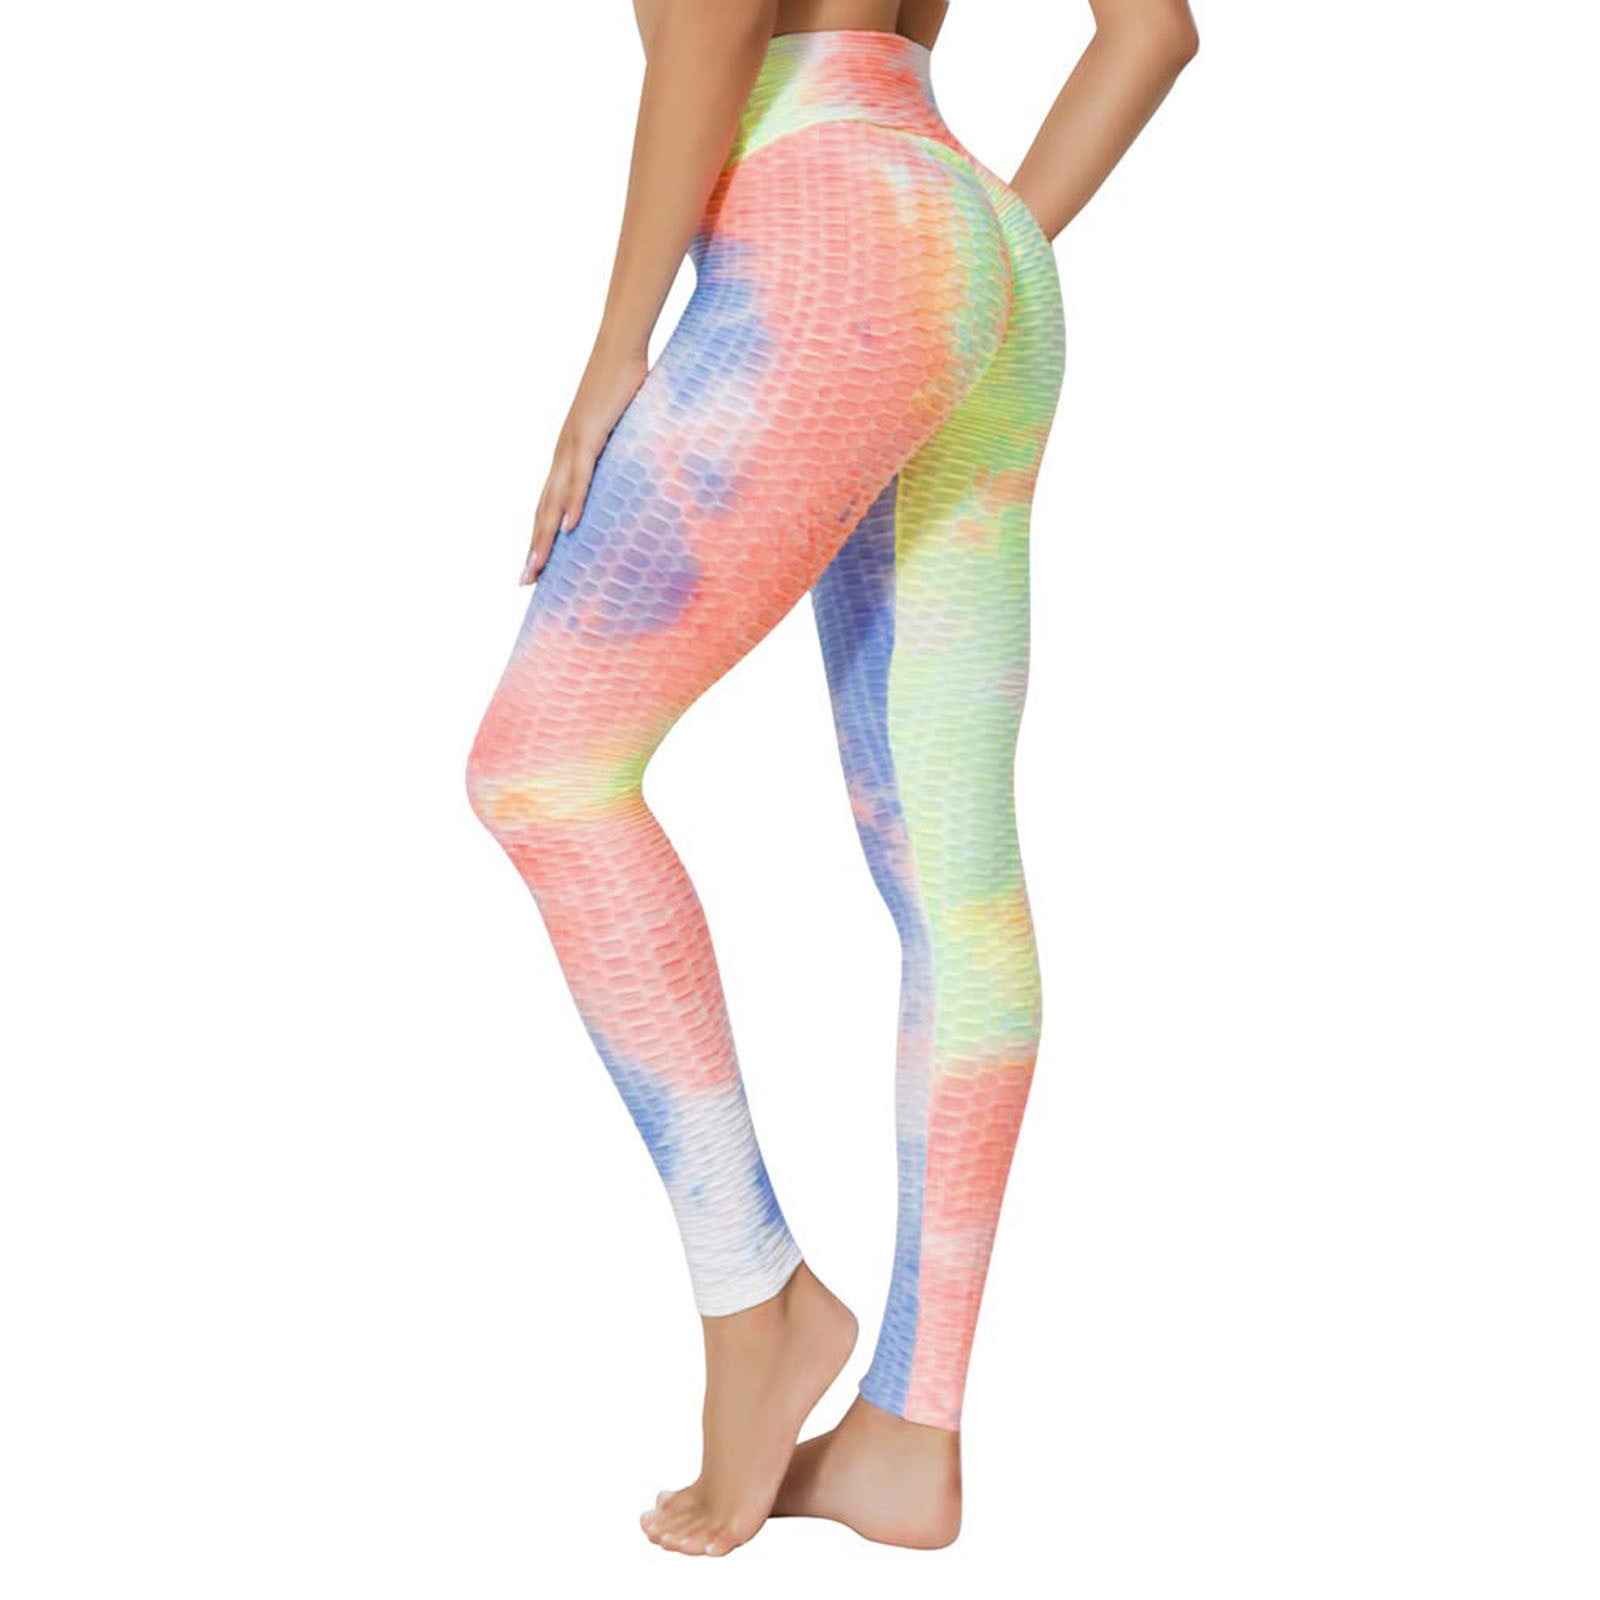 N6202  Basketball Compression Tights :: Basketball tights for cheap